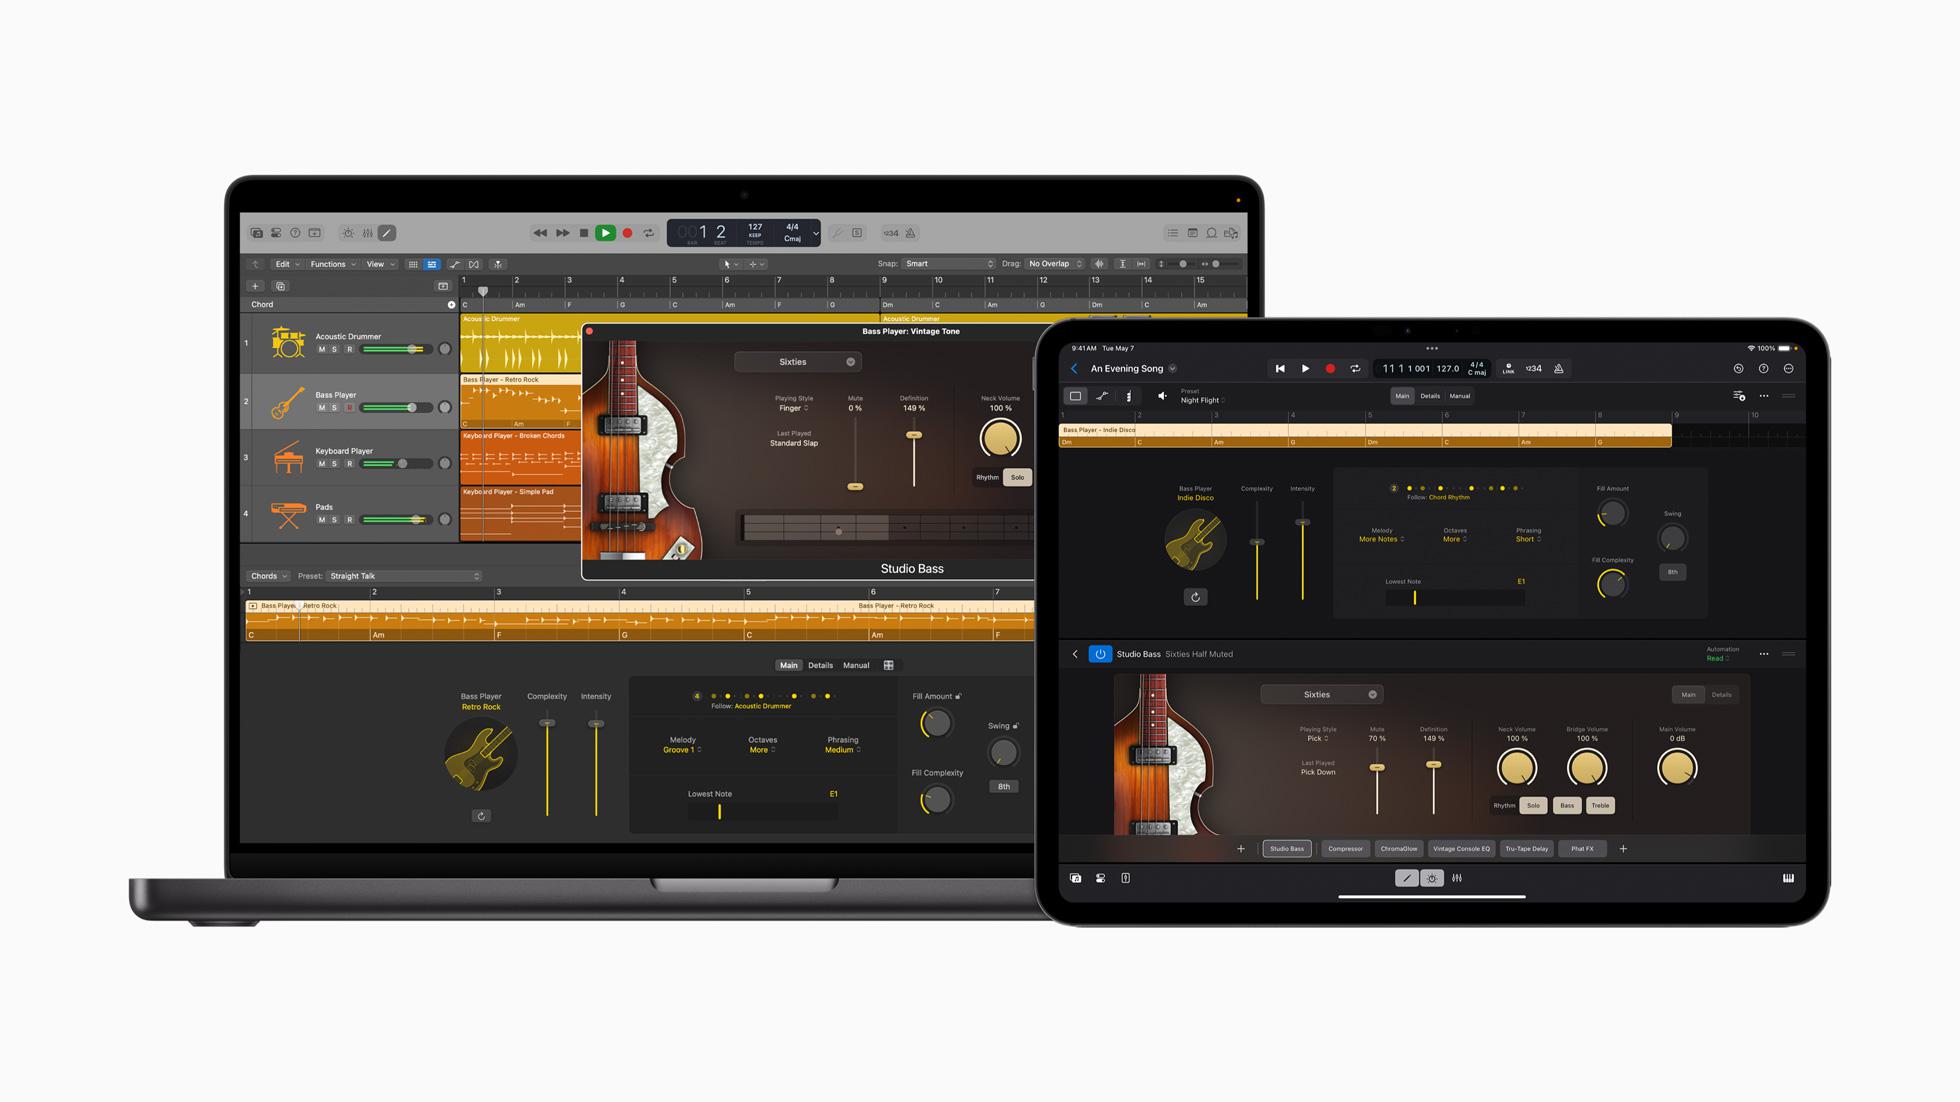 New features added to Logic Pro on iPad and Mac enable music creation with artificial intelligence